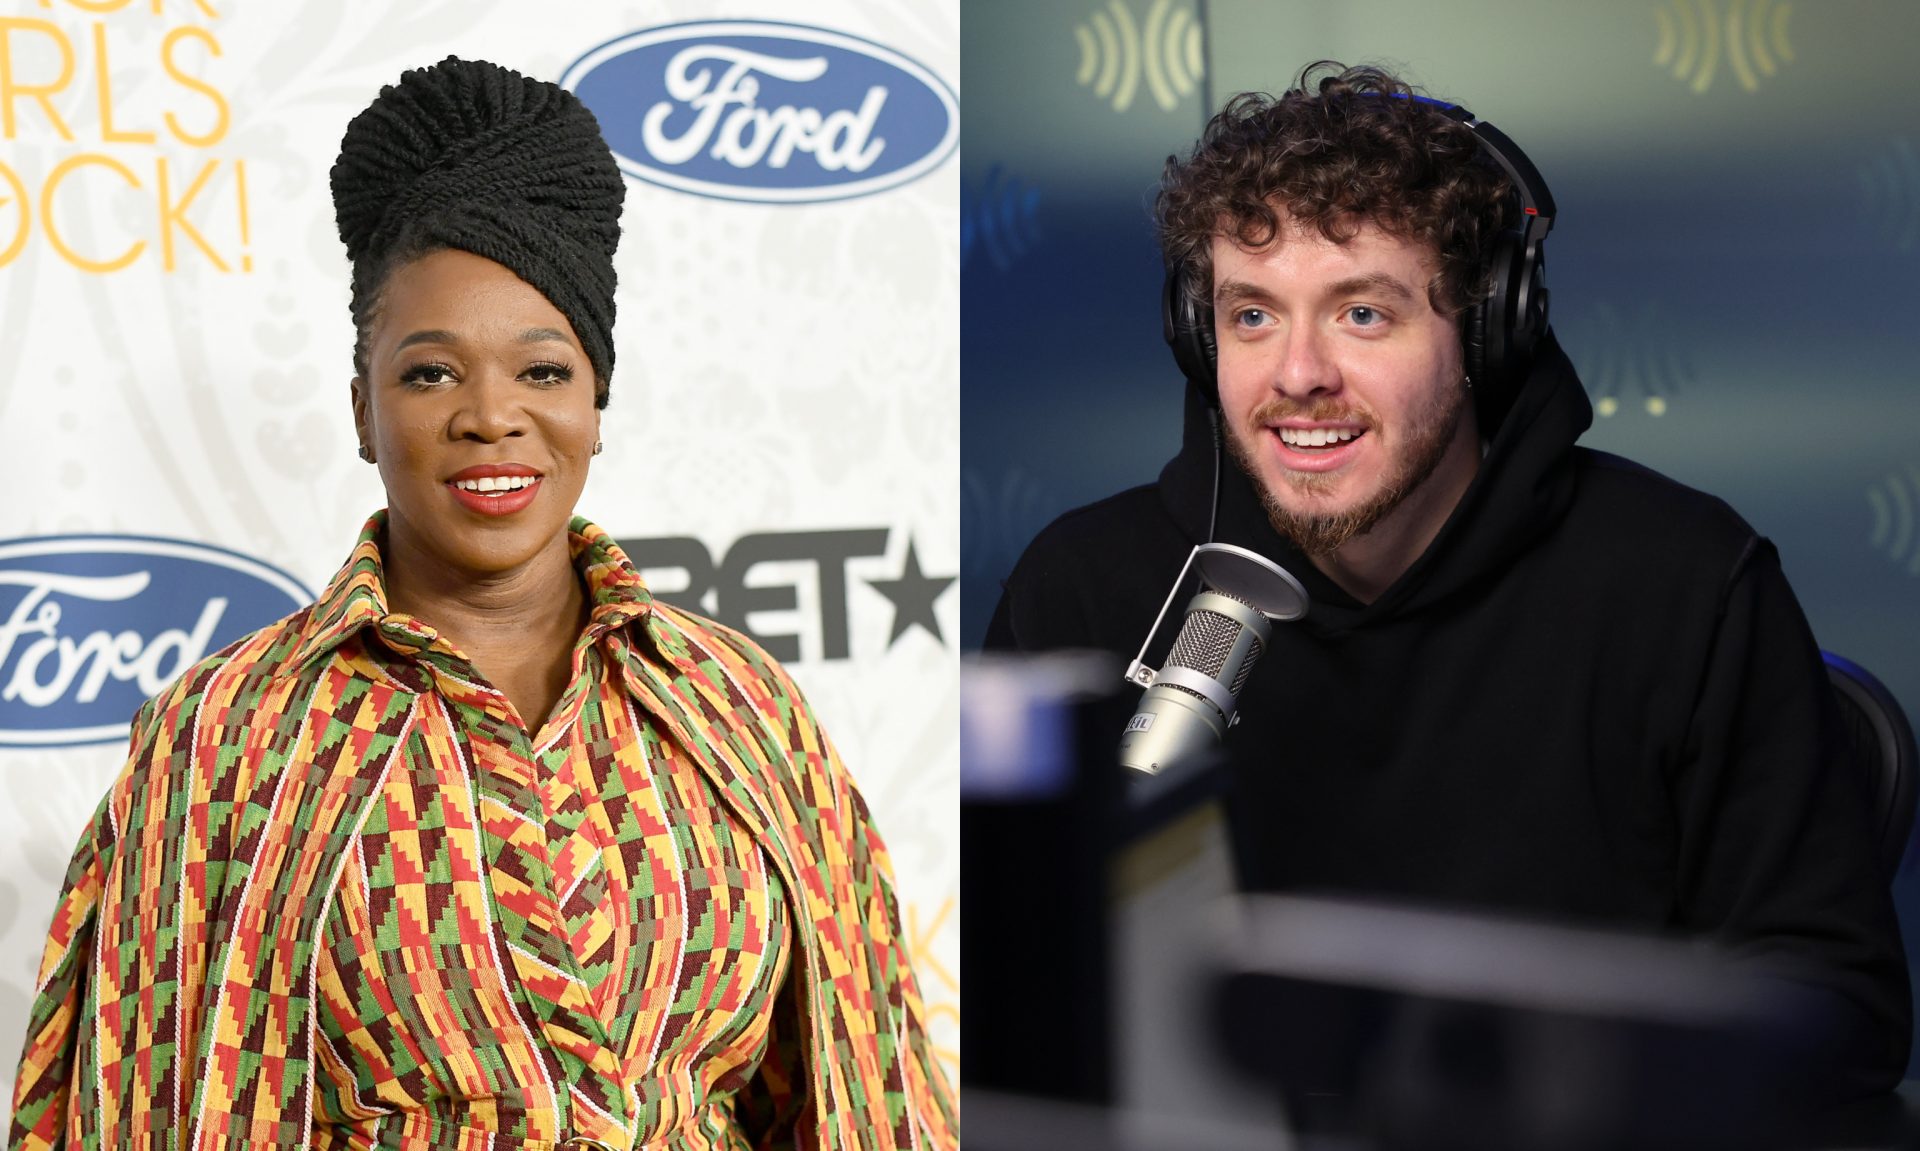 India Arie Highlights Black Music Vs. Culture After Jack Harlow Learned Of Brandy And Ray J's Family Ties